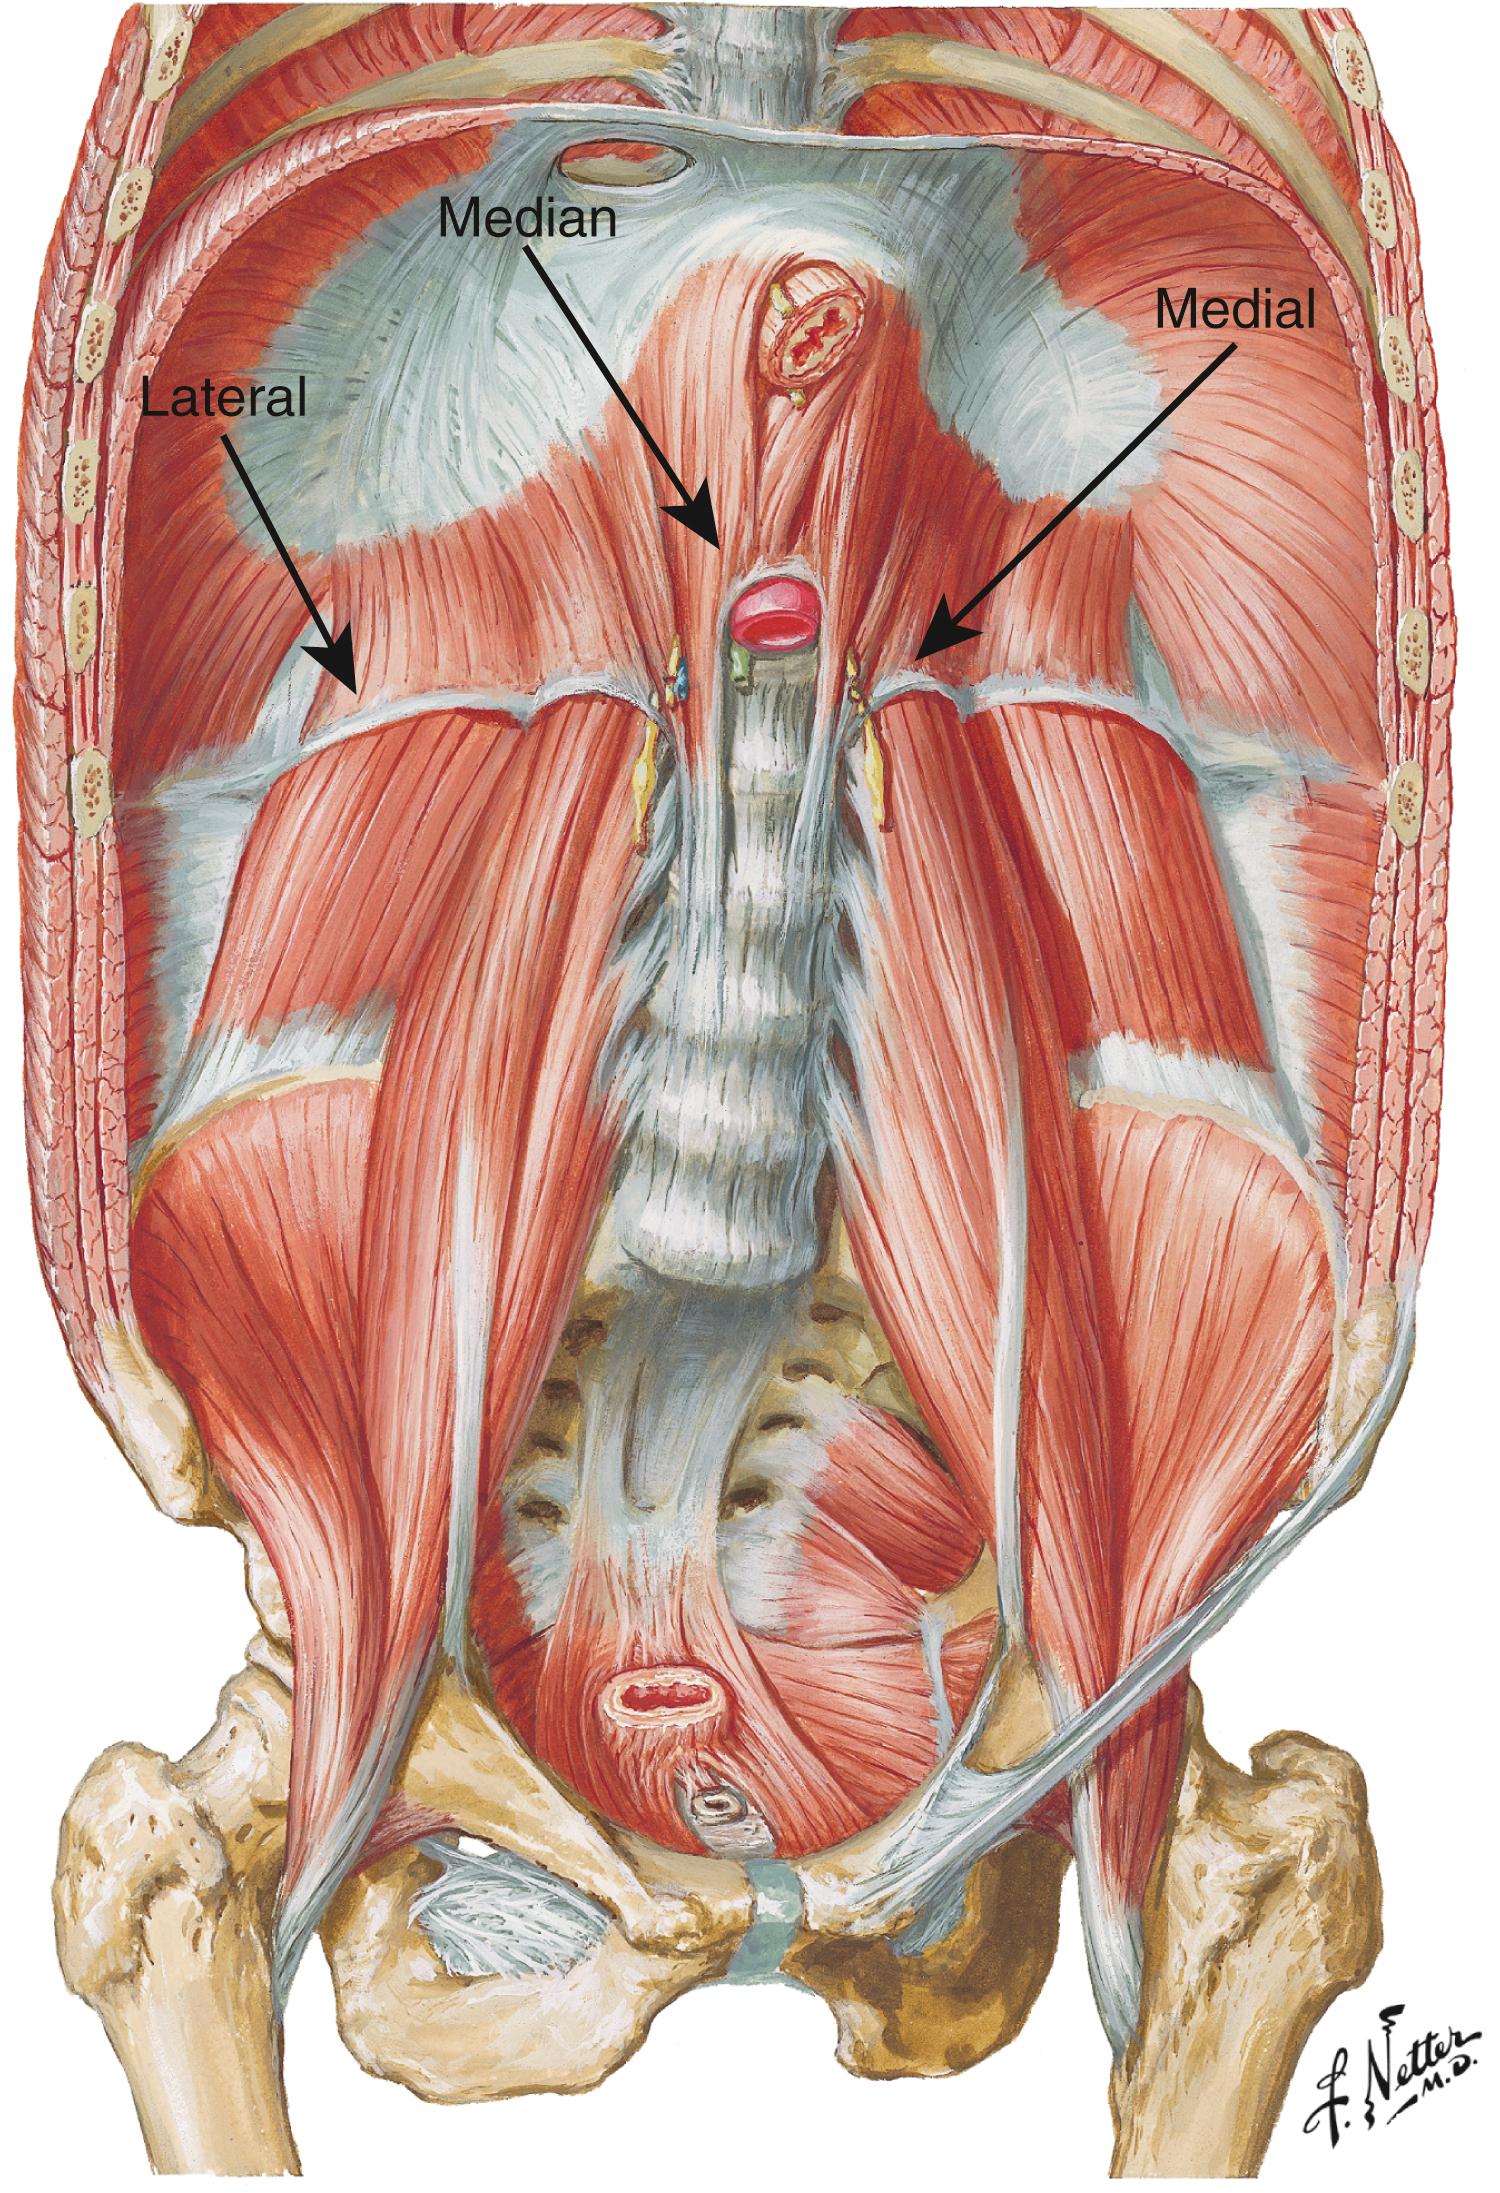 Figure 136.1, Artistic rendering of the retroperitoneal musculature and diaphragm. Arrows depicting the median, medial, and lateral arcuate ligaments.